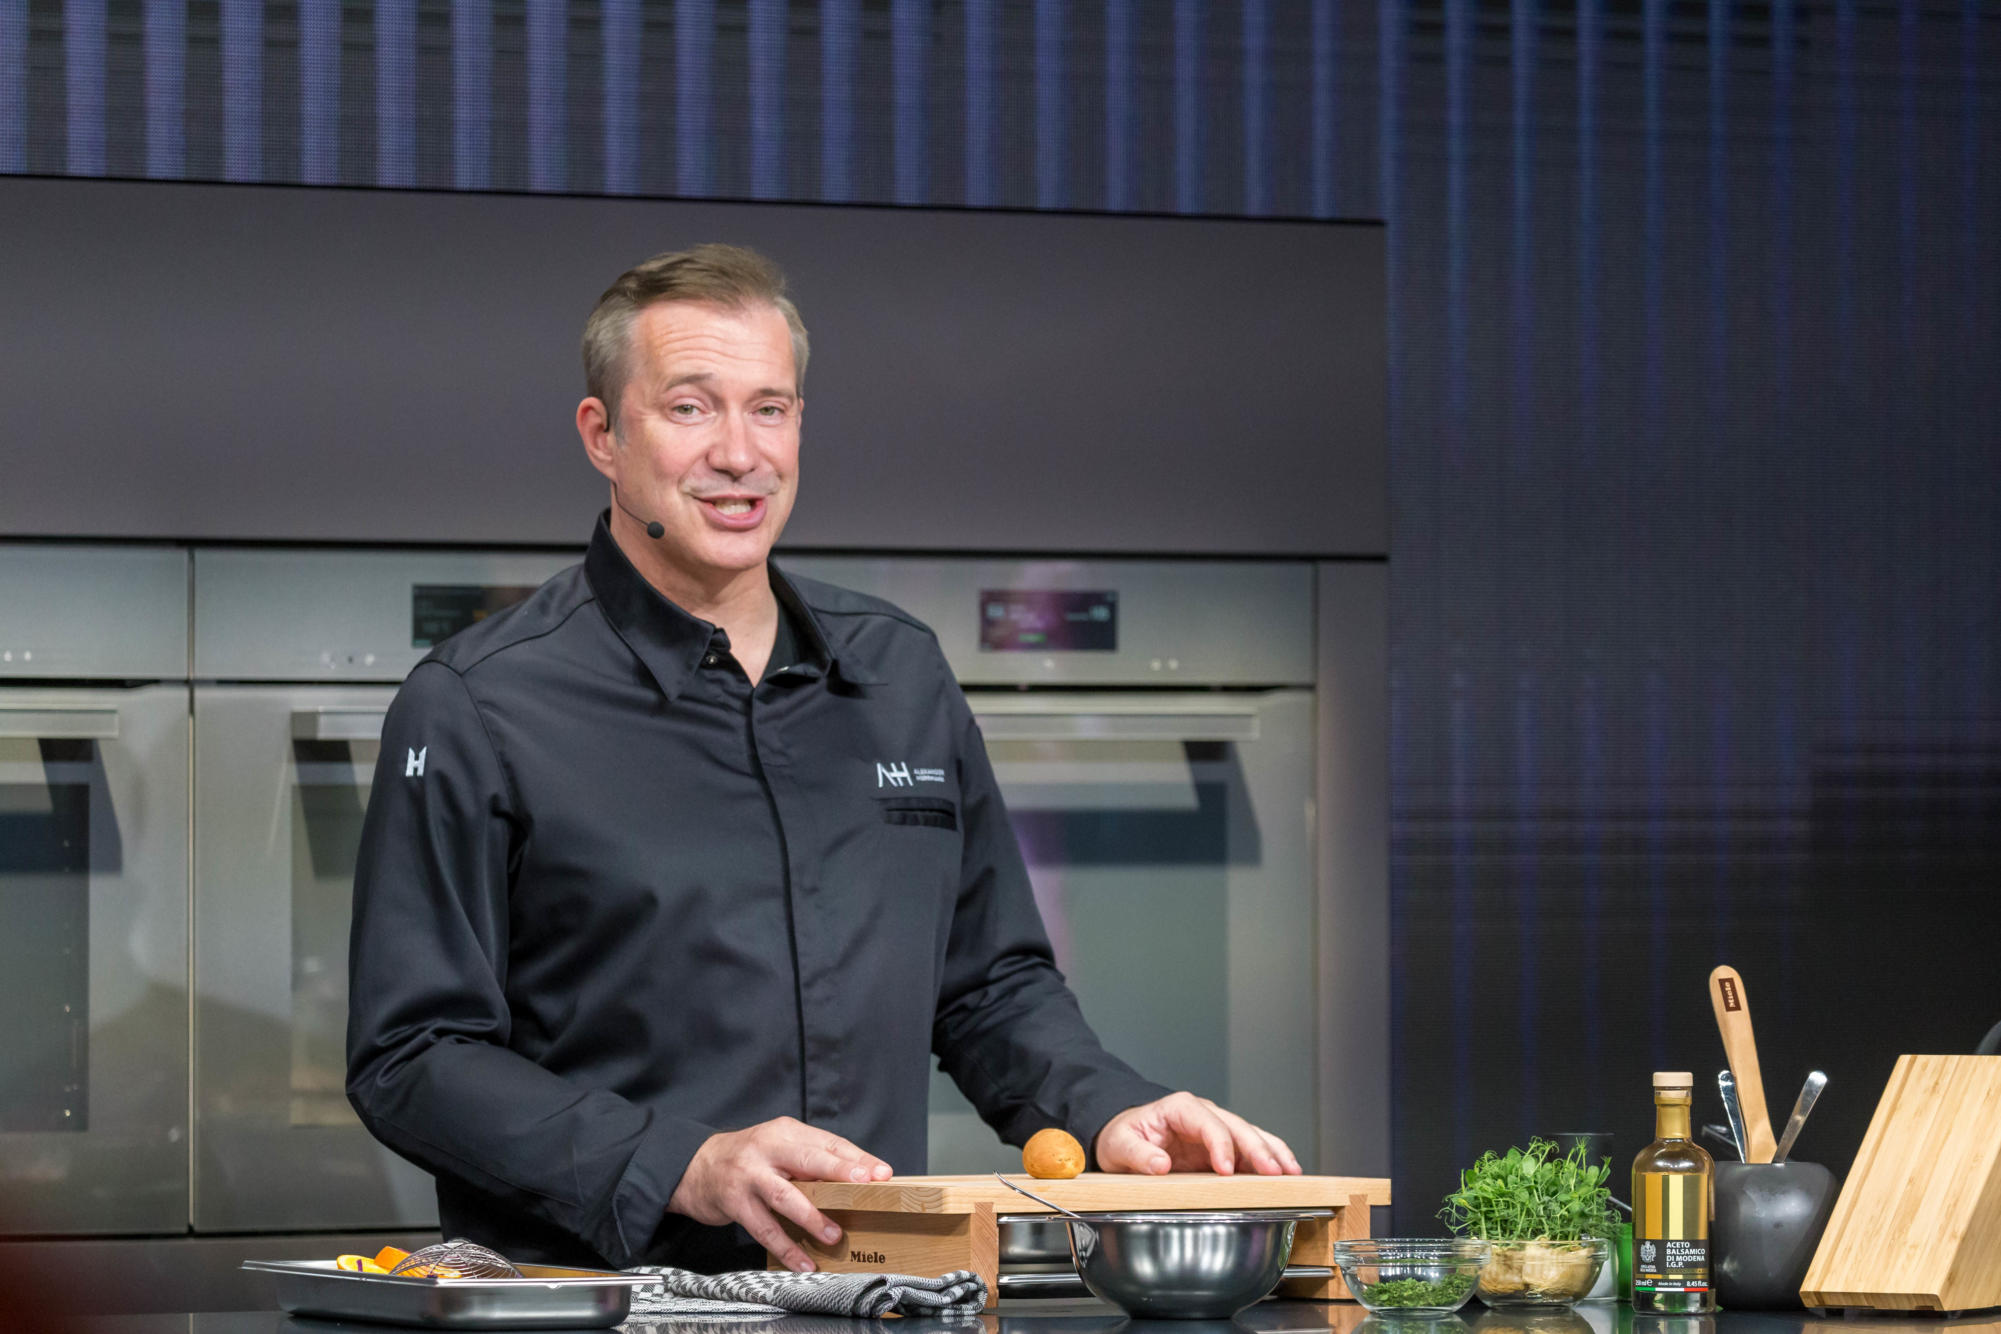 Cooking shows have become a staple on stream networks like Netflix.